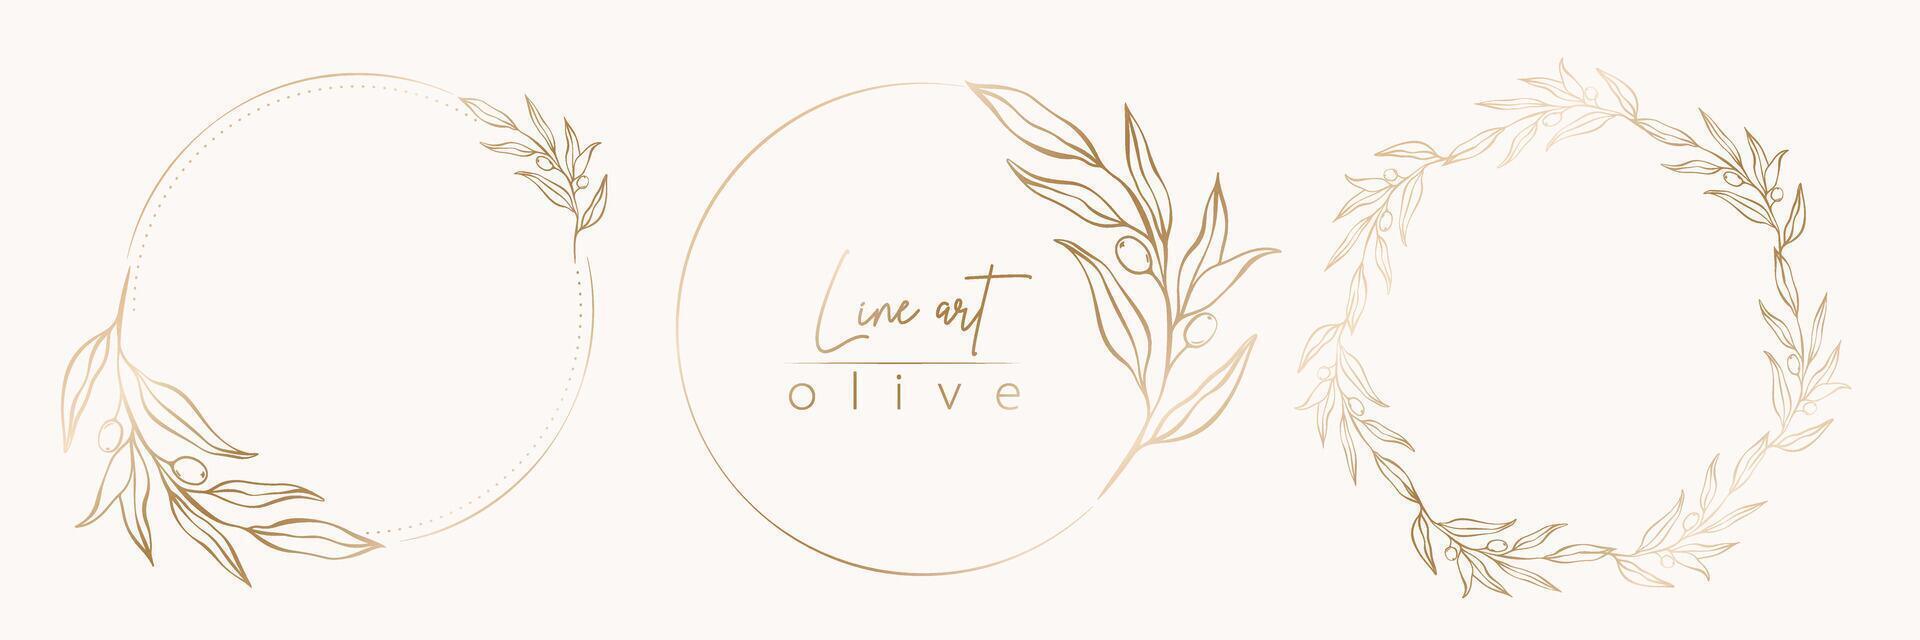 Botanical line illustration set of olive leaves, branch wreath for wedding invitation and cards, logo design, web, social media and posters template. Elegant minimal style floral vector isolated.